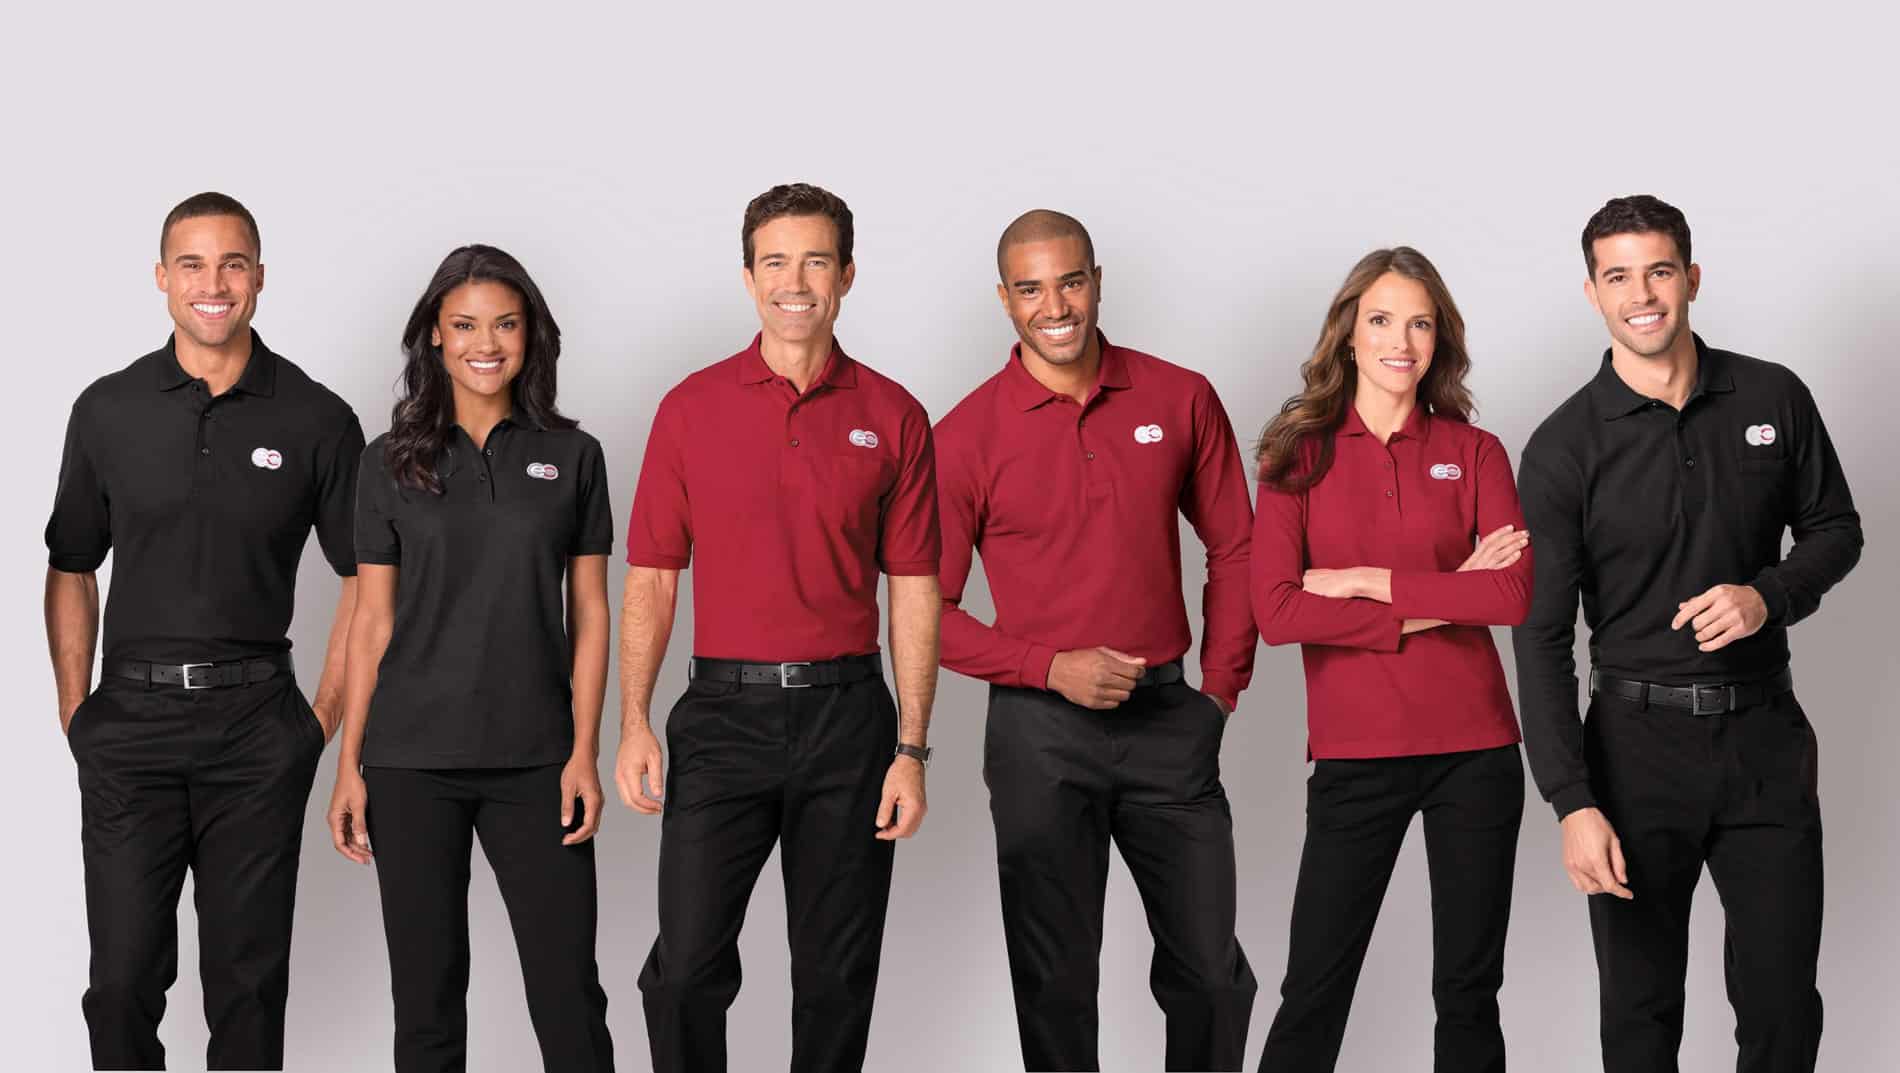 custom-embroidered-polos-by-printology.jpeg